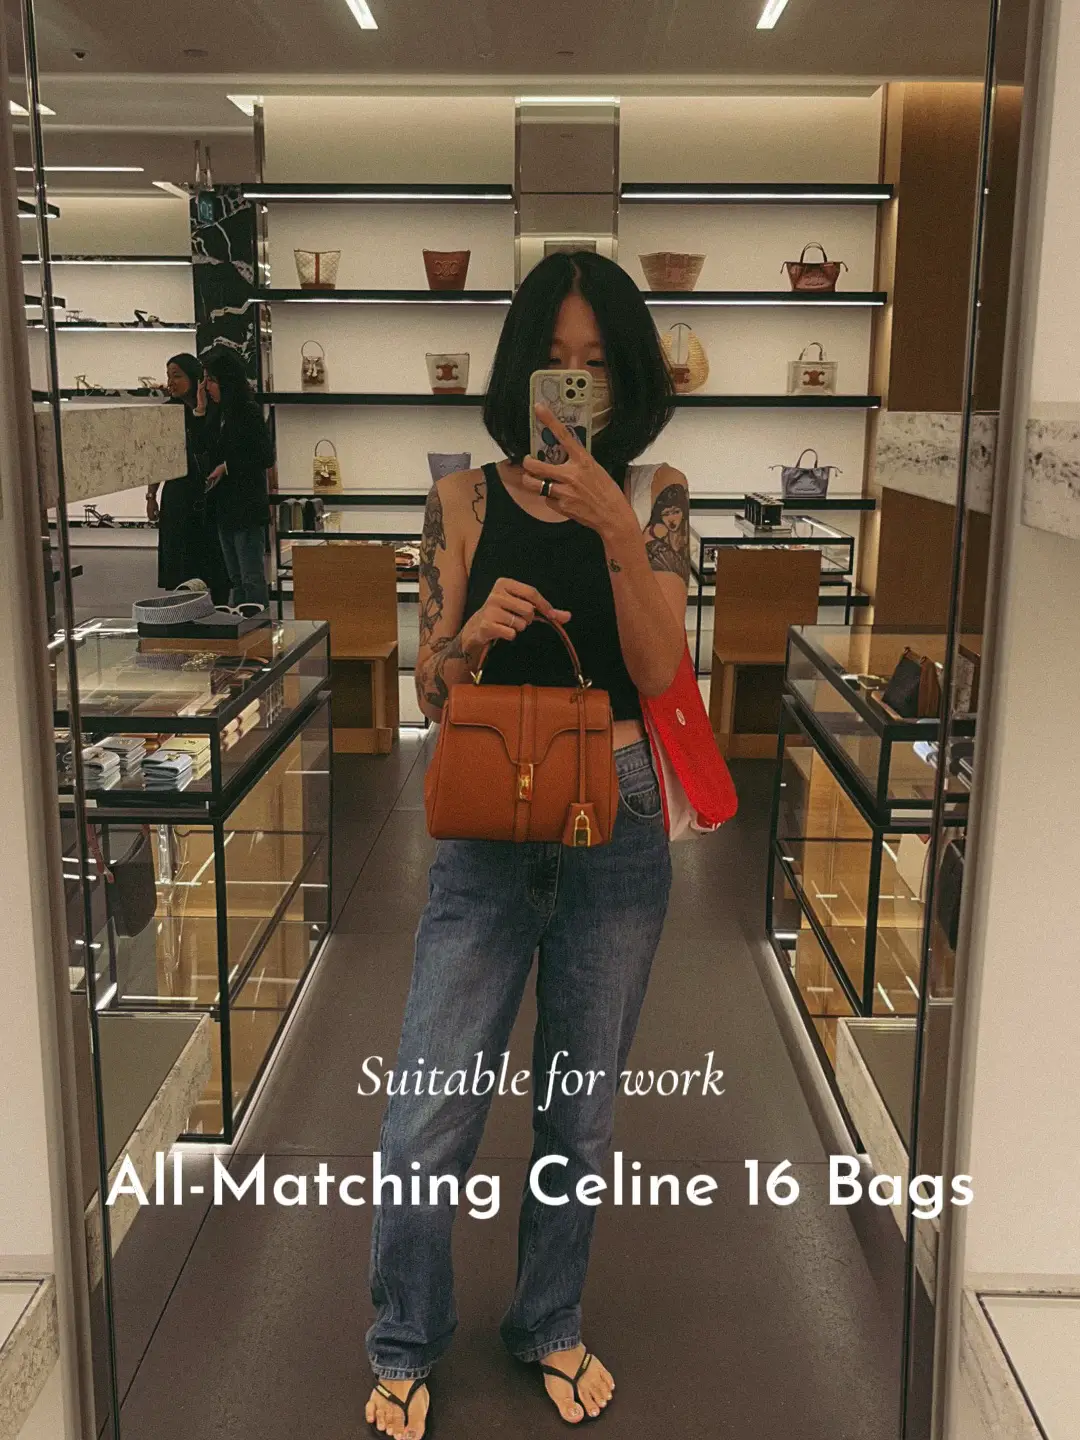 Opinions on the Celine 16?